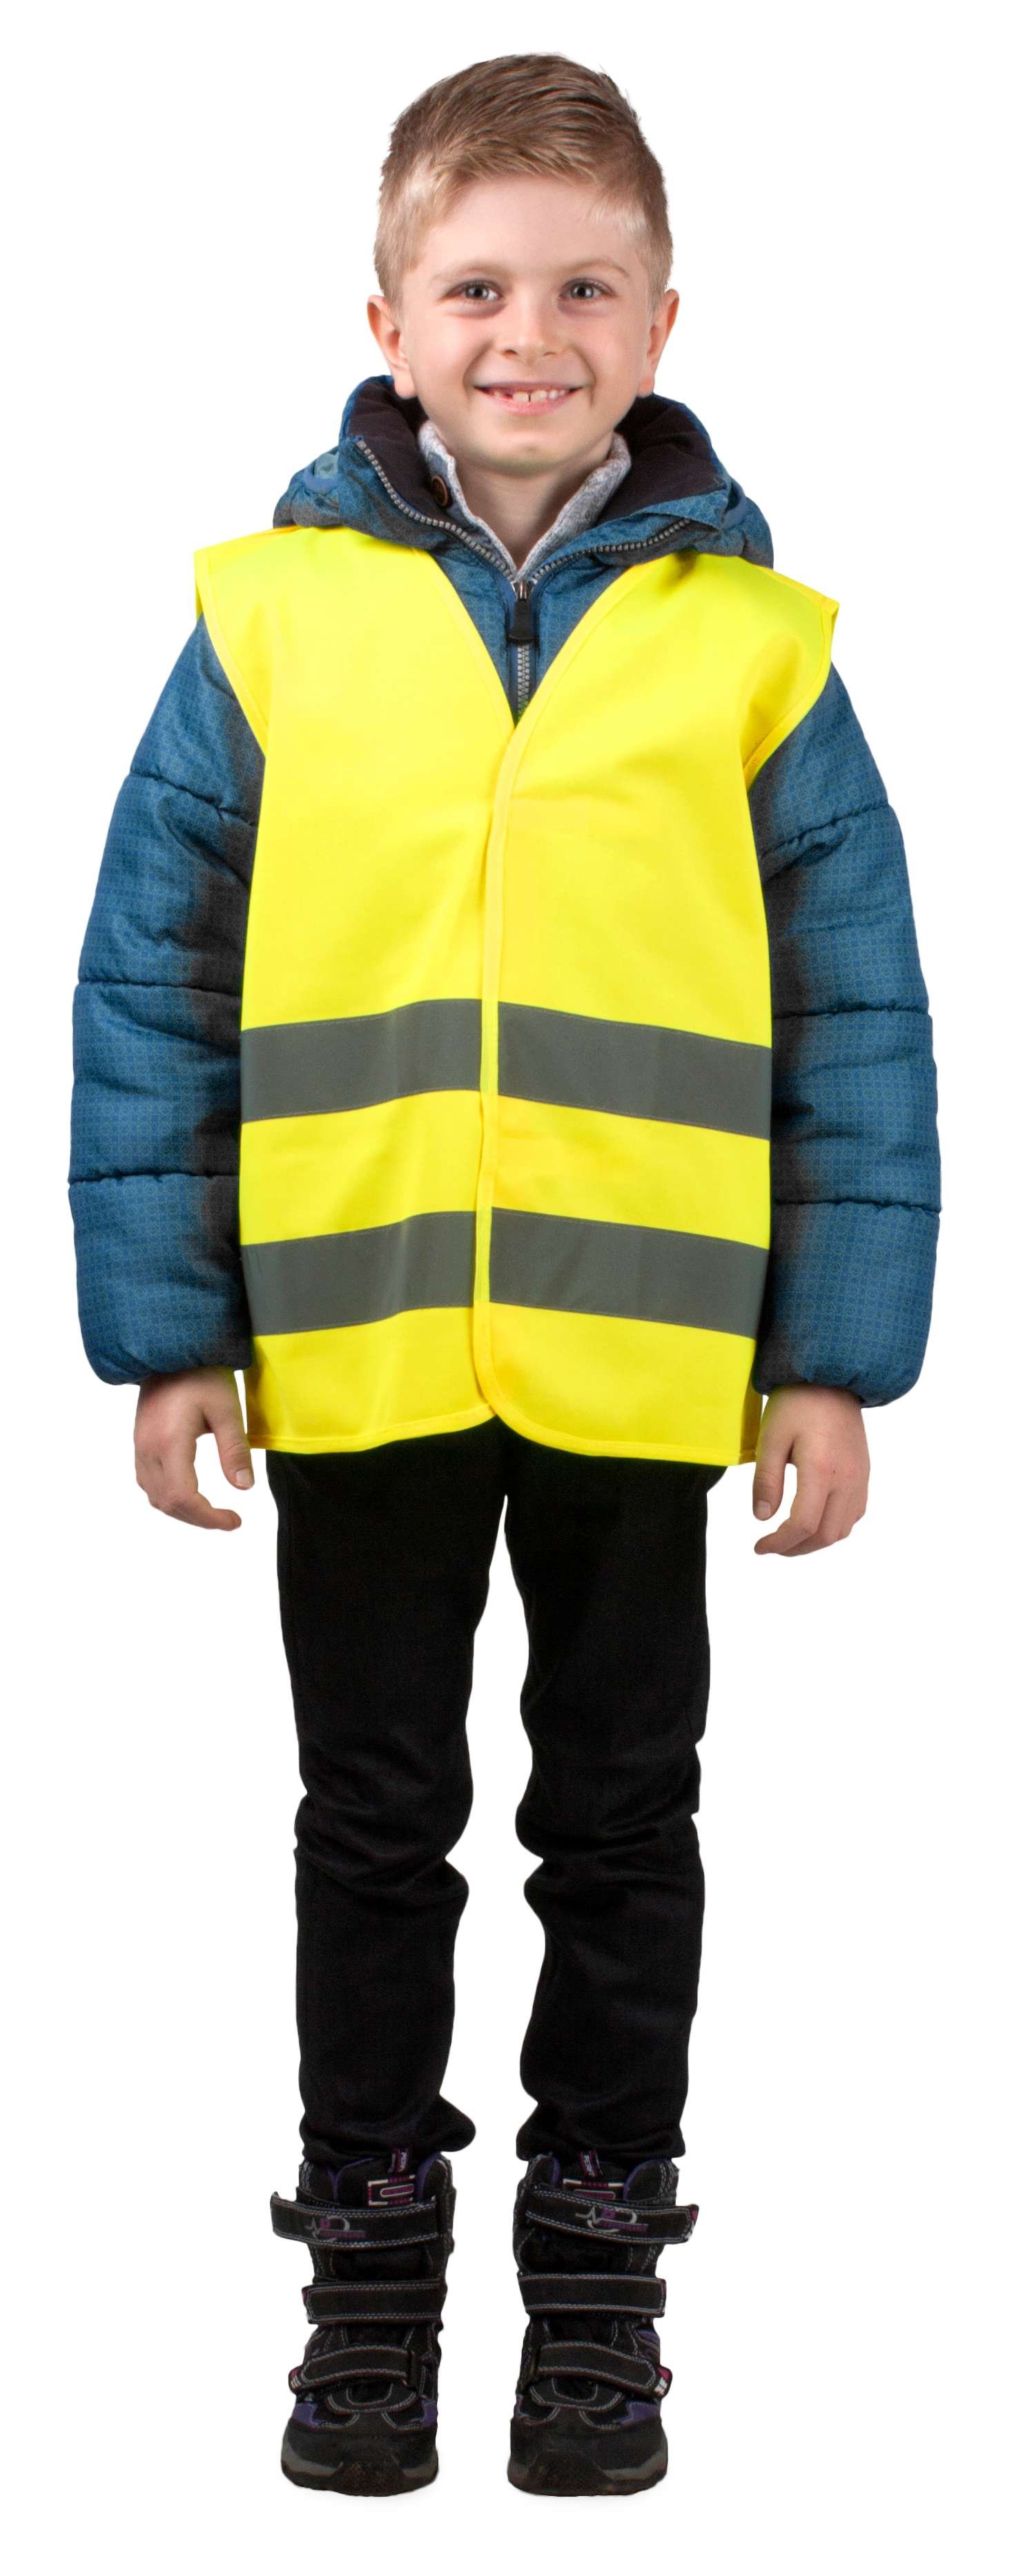 Safety vest size XS for children 3-6 years Yellow EN 1150